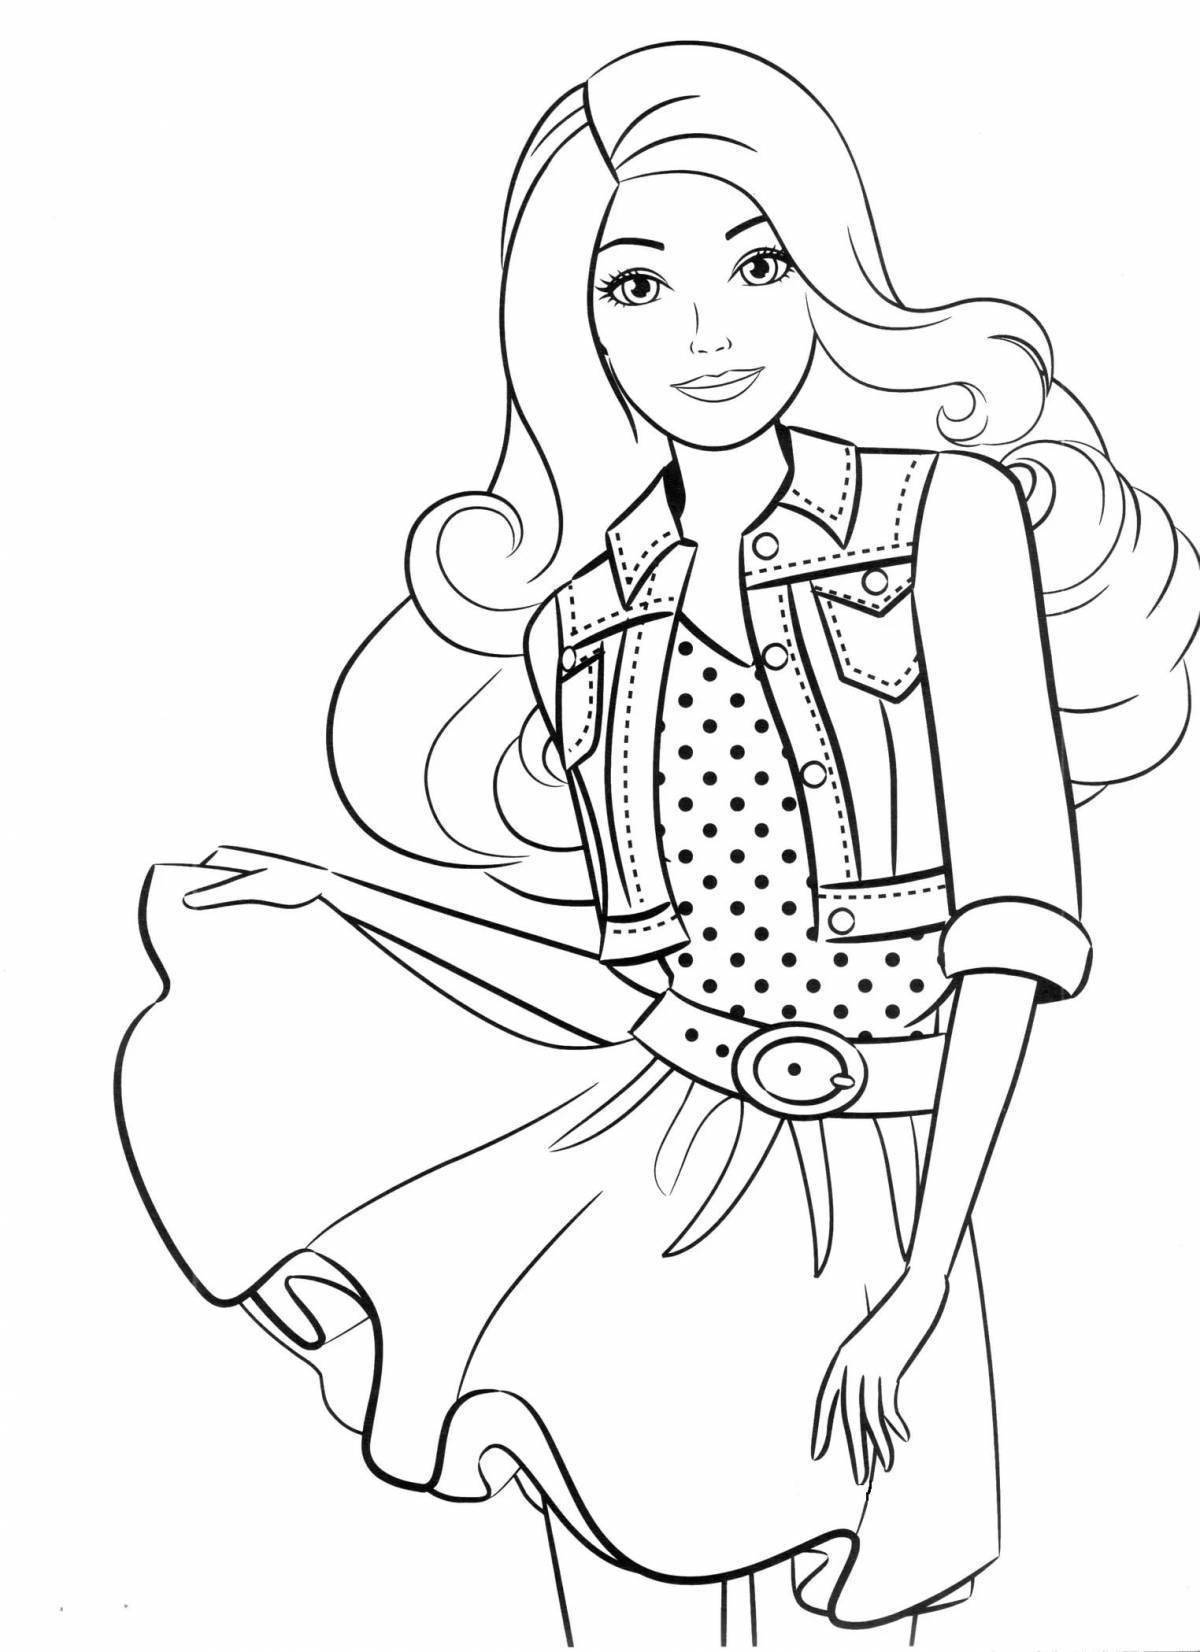 Colorful barbie coloring book